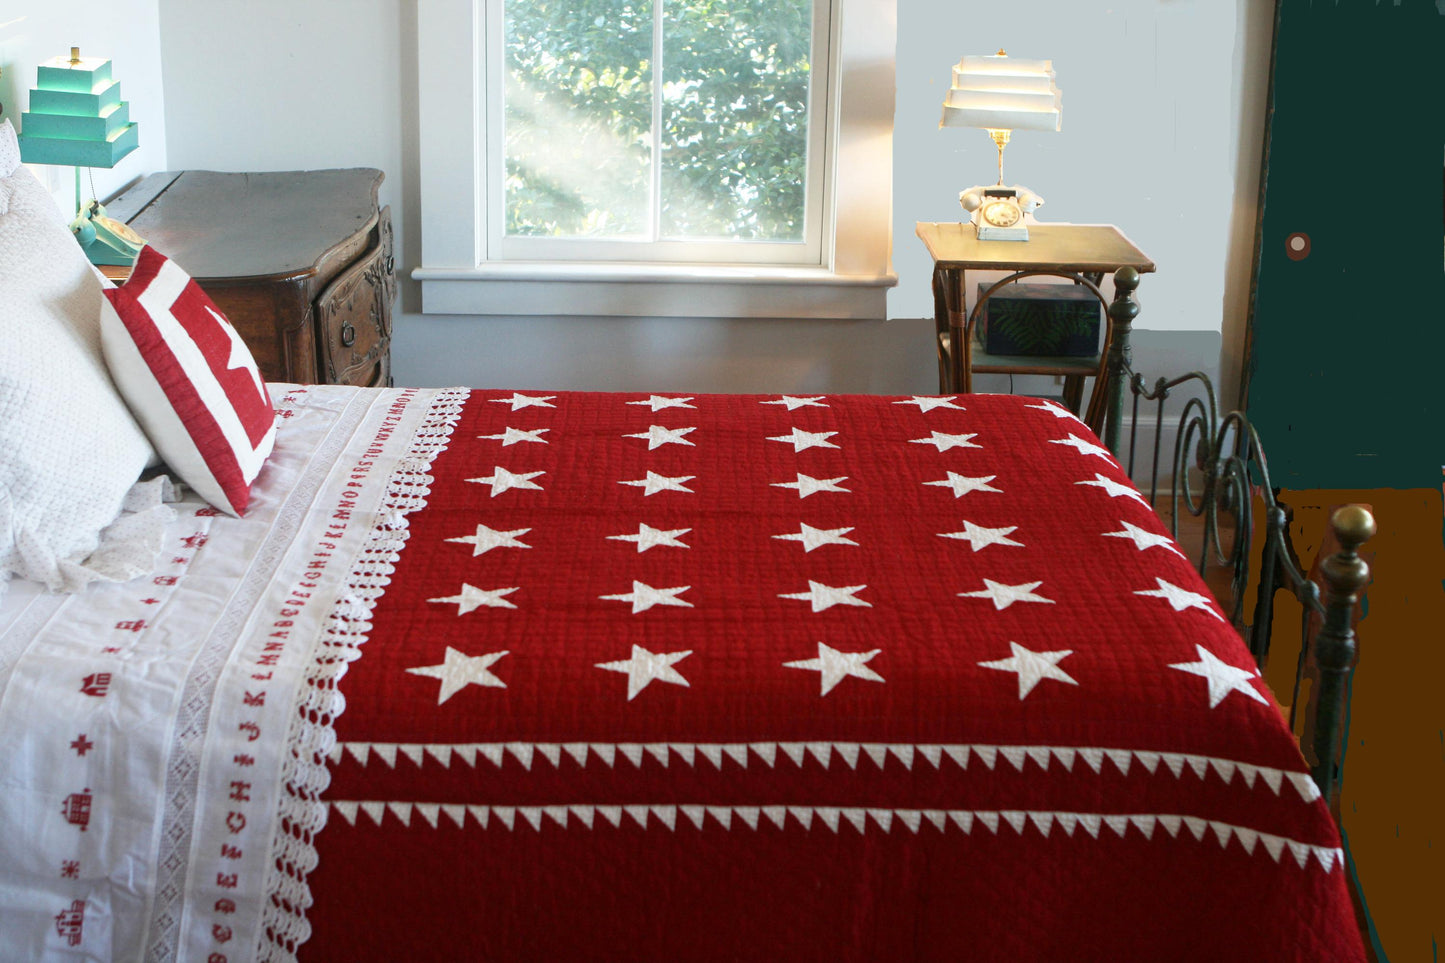 "Patriotic Stars" Quilt in Red-White